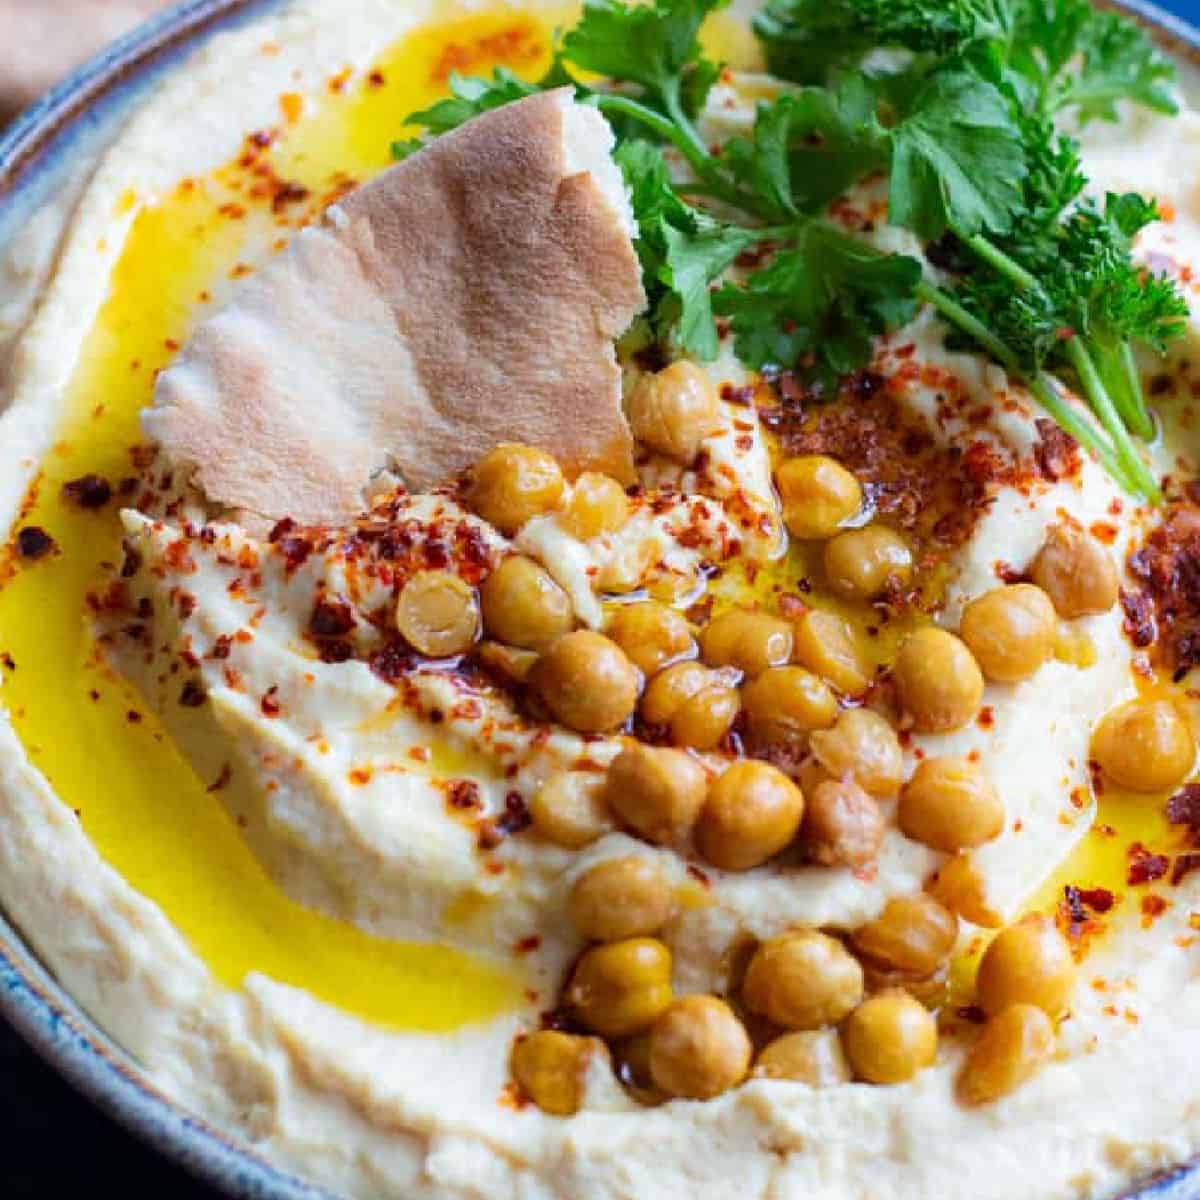 This is the ultimate homemade hummus recipe. It’s smooth and creamy with a bright flavor, and pairs perfectly with bread! Follow along for tip and tricks, a video tutorial and complete details!
